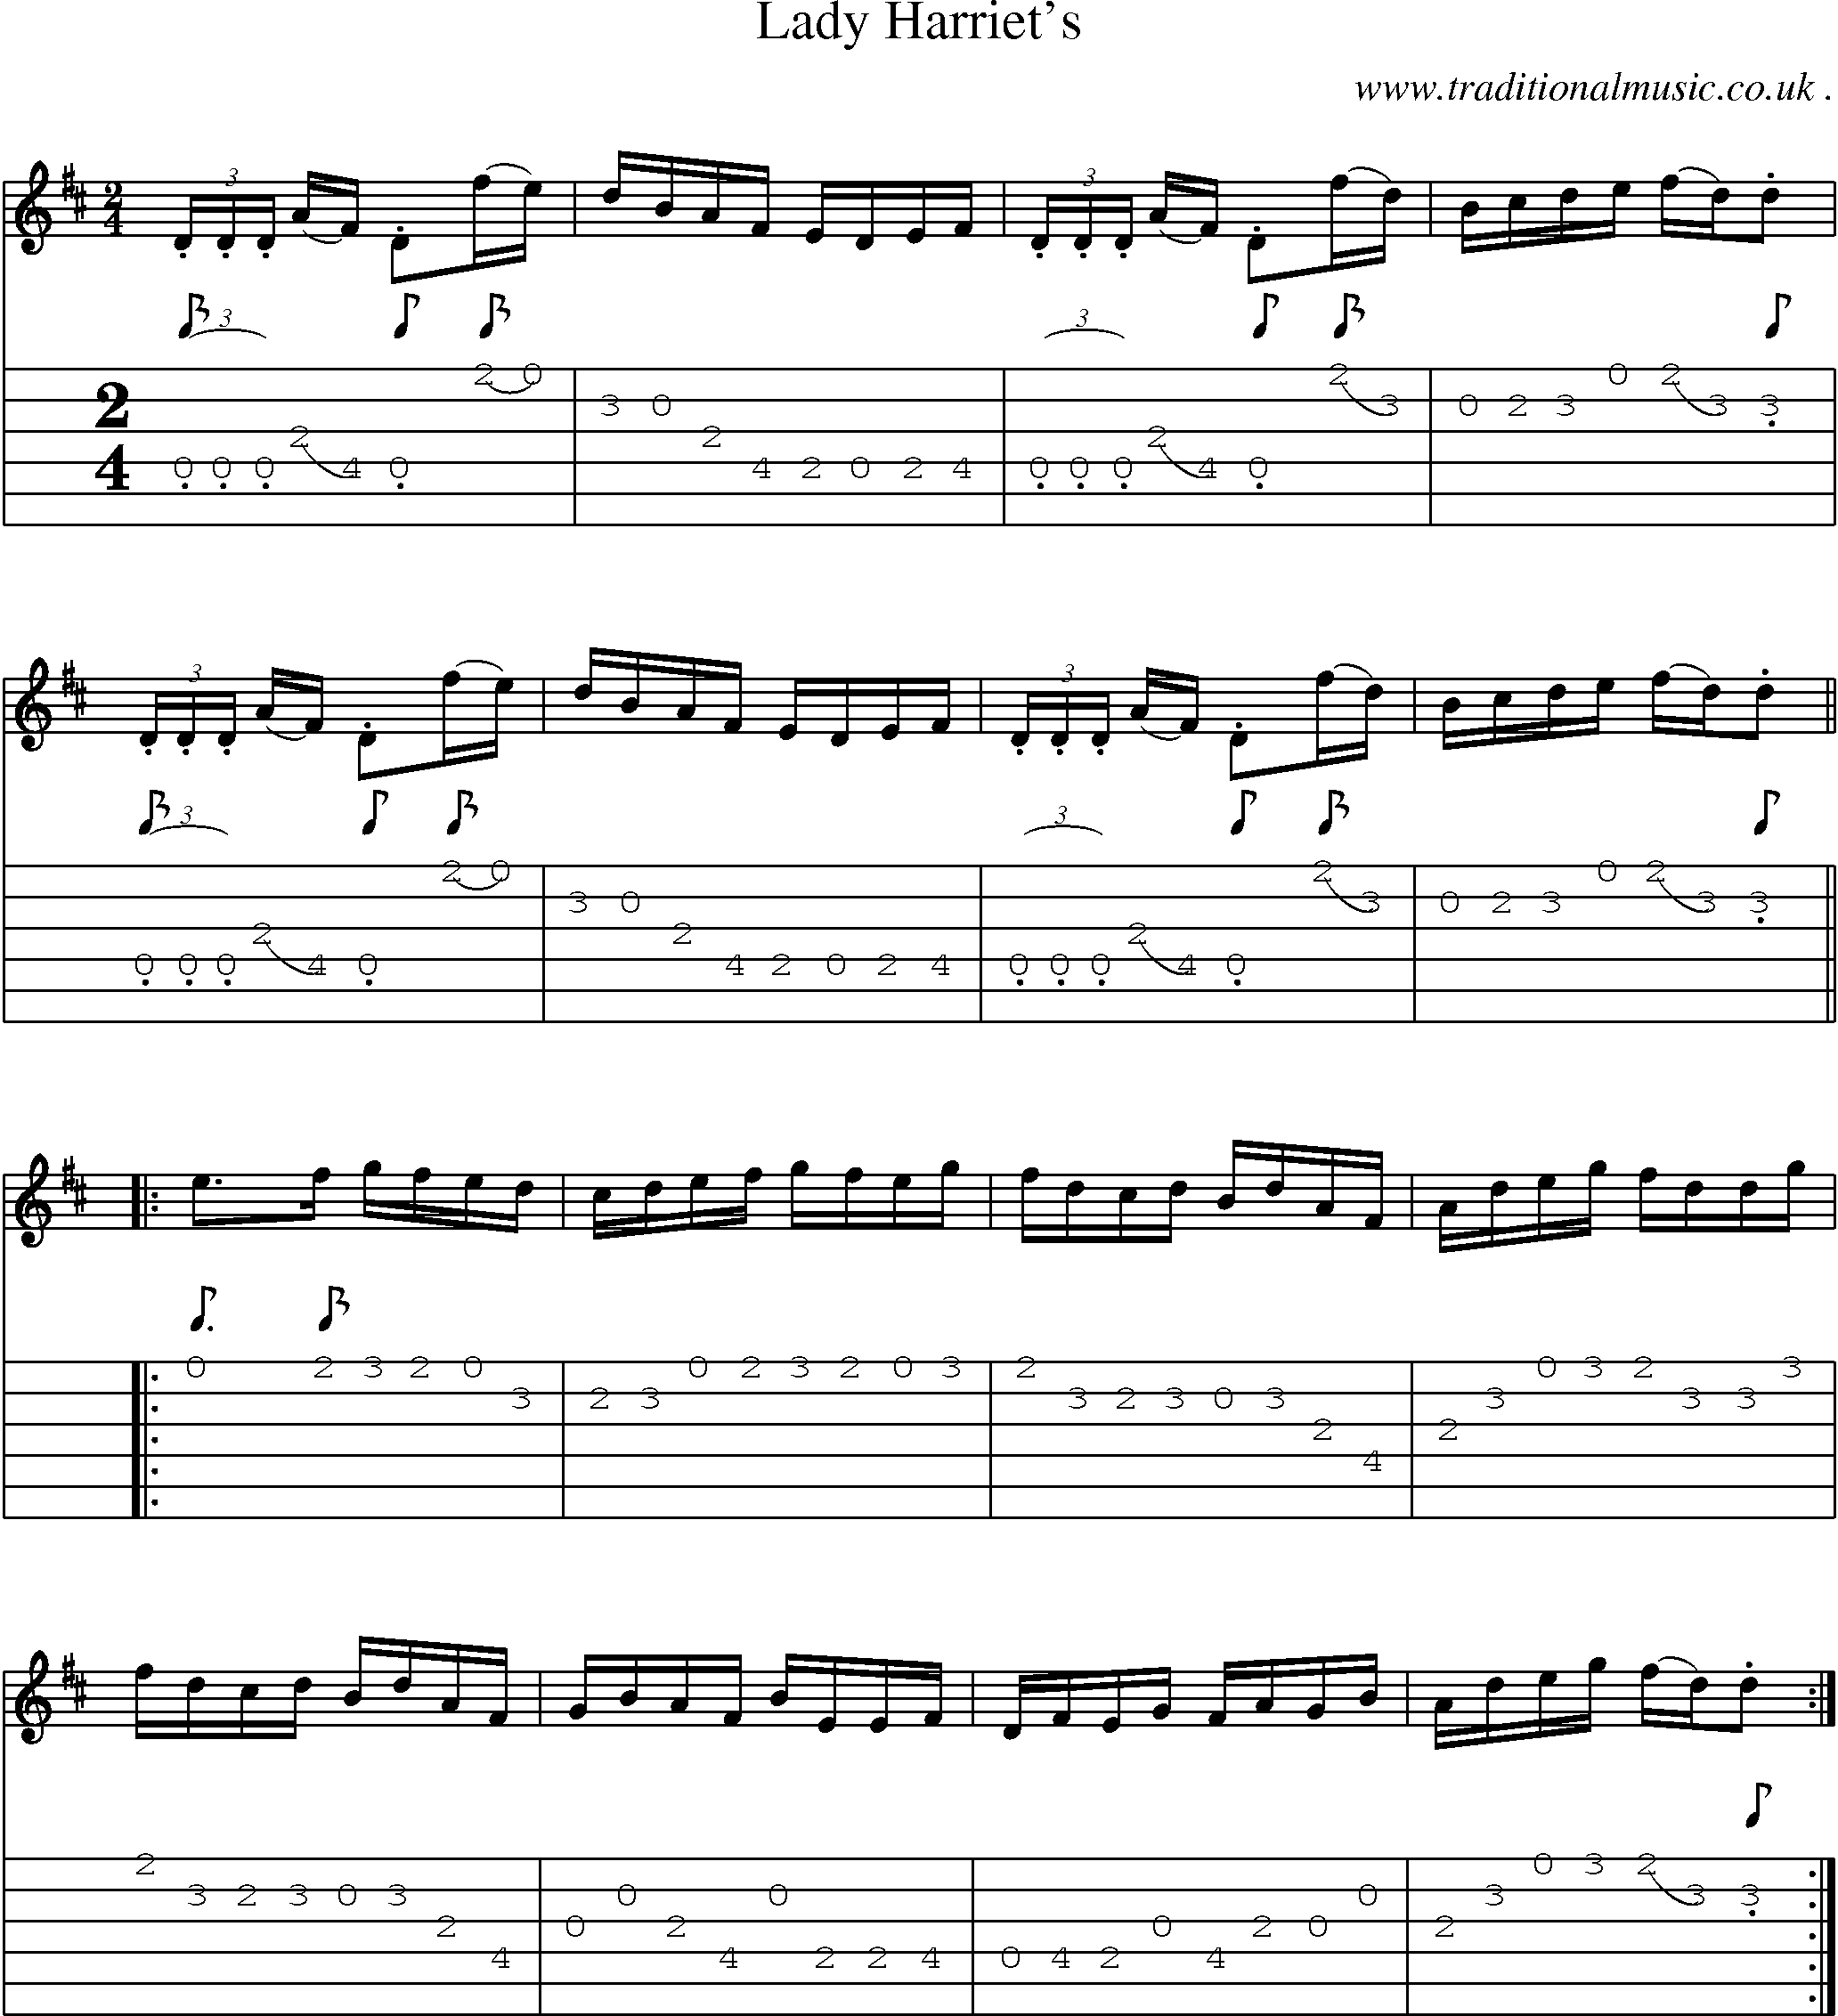 Sheet-Music and Guitar Tabs for Lady Harriets